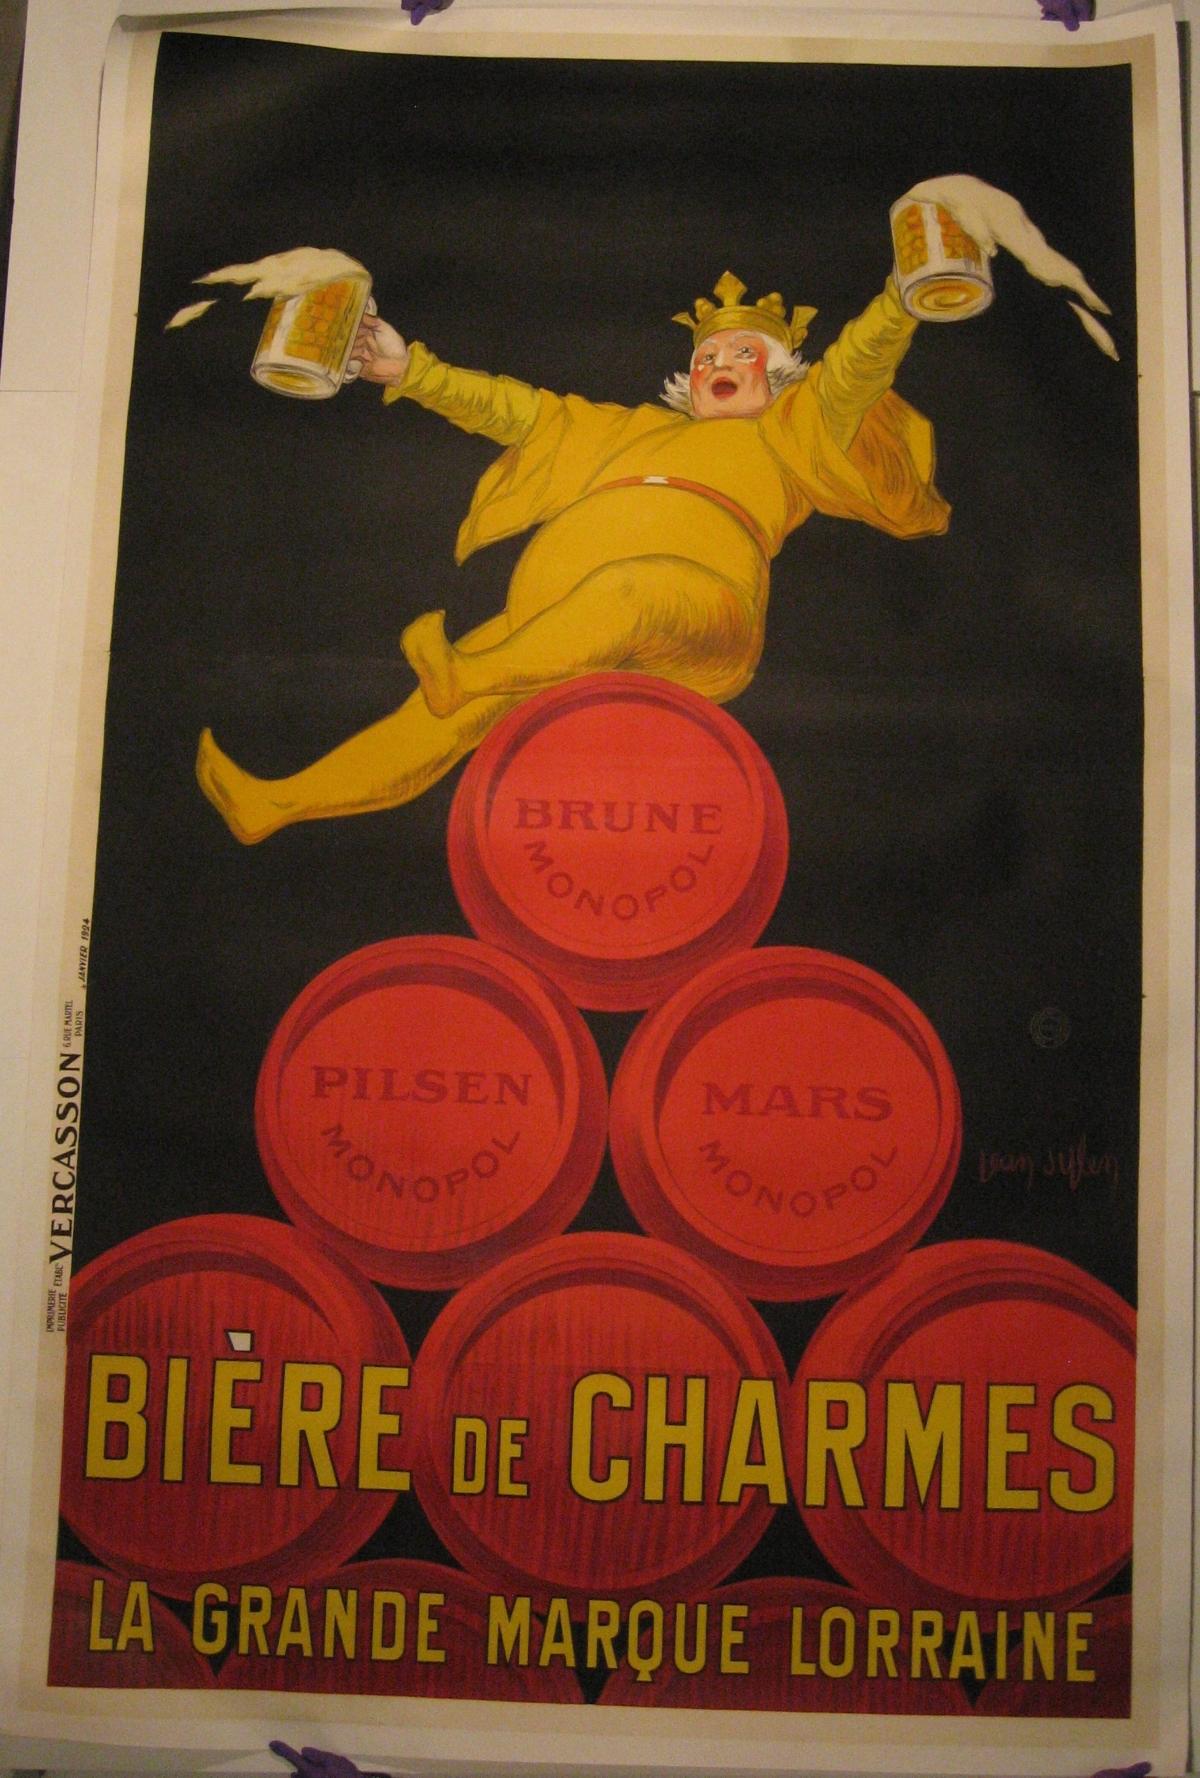 Artist: John D’Ylen (French 1866-1938)

Date of Origin: 1924

Medium: Original Stone Lithograph Vintage Poster

Size: 78” x 123”

 

This is the larger, three-sheet version of this vibrant beer poster. Circulation was much lower for this format than